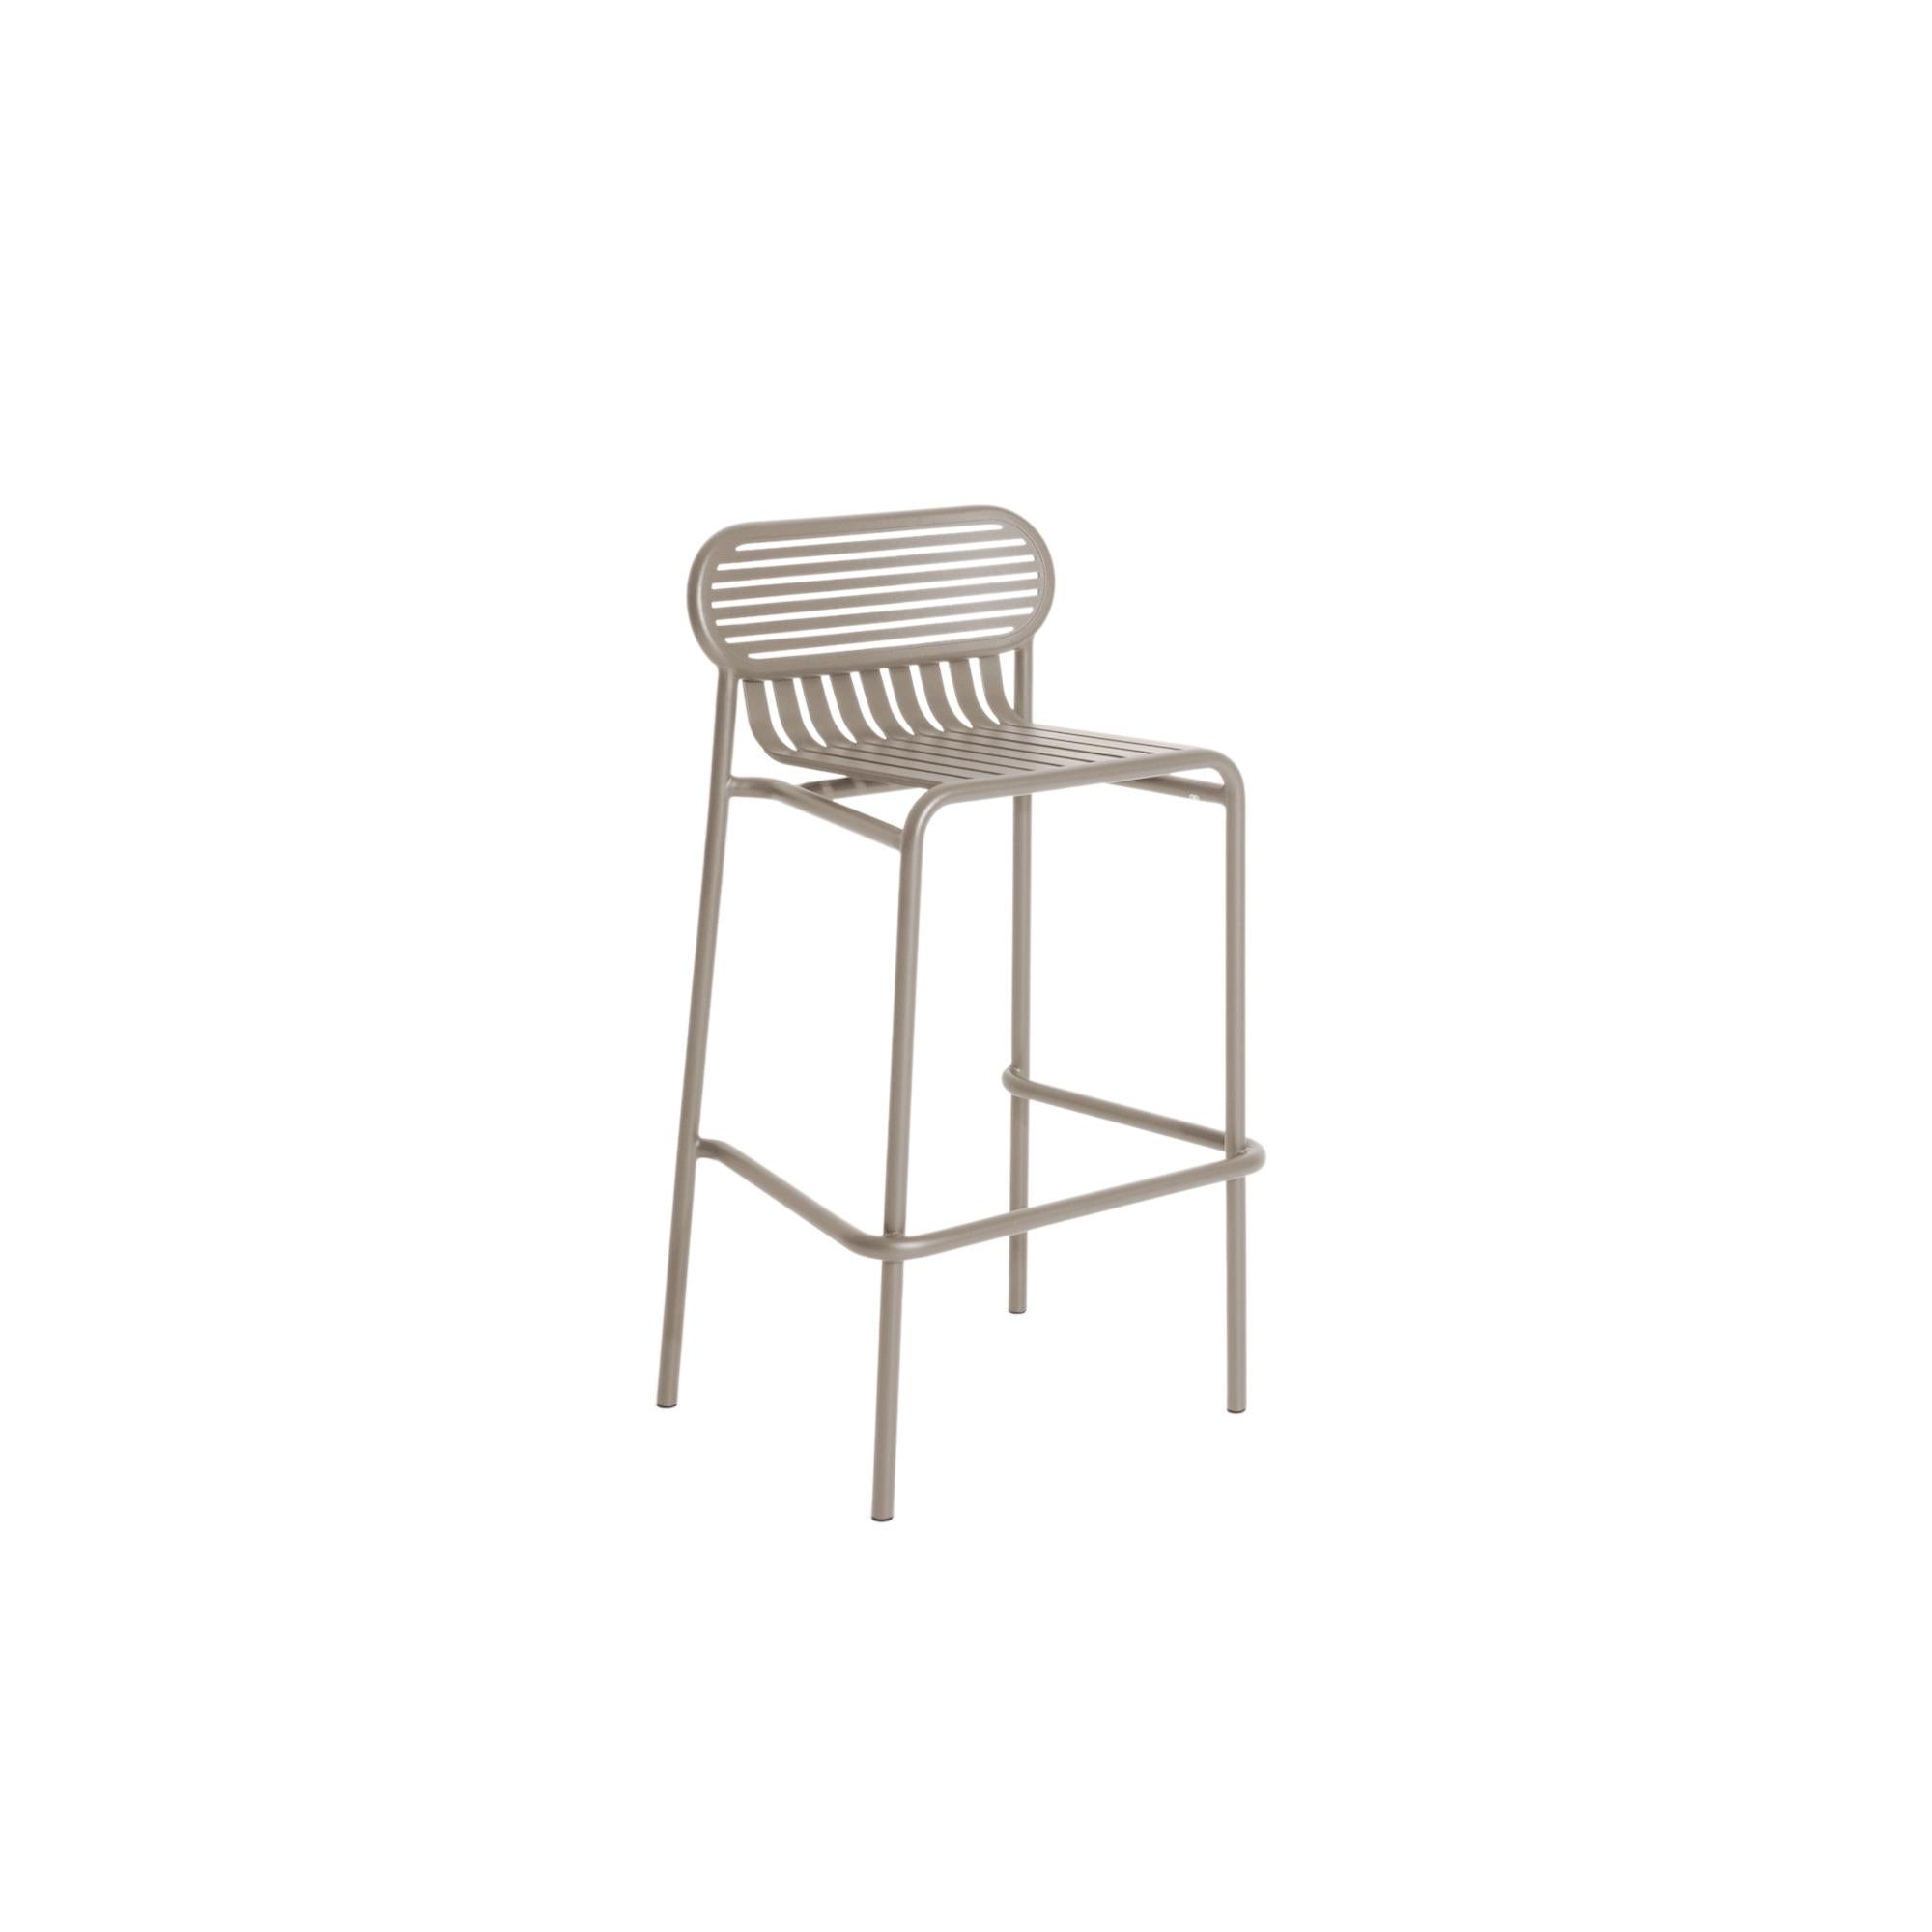 Petite Friture Week-End Bar Stool in Dune Aluminium by Studio BrichetZiegler, 2017

The week-end collection is a full range of outdoor furniture, in aluminium grained epoxy paint, matt finish, that includes 18 functions and 8 colours for the